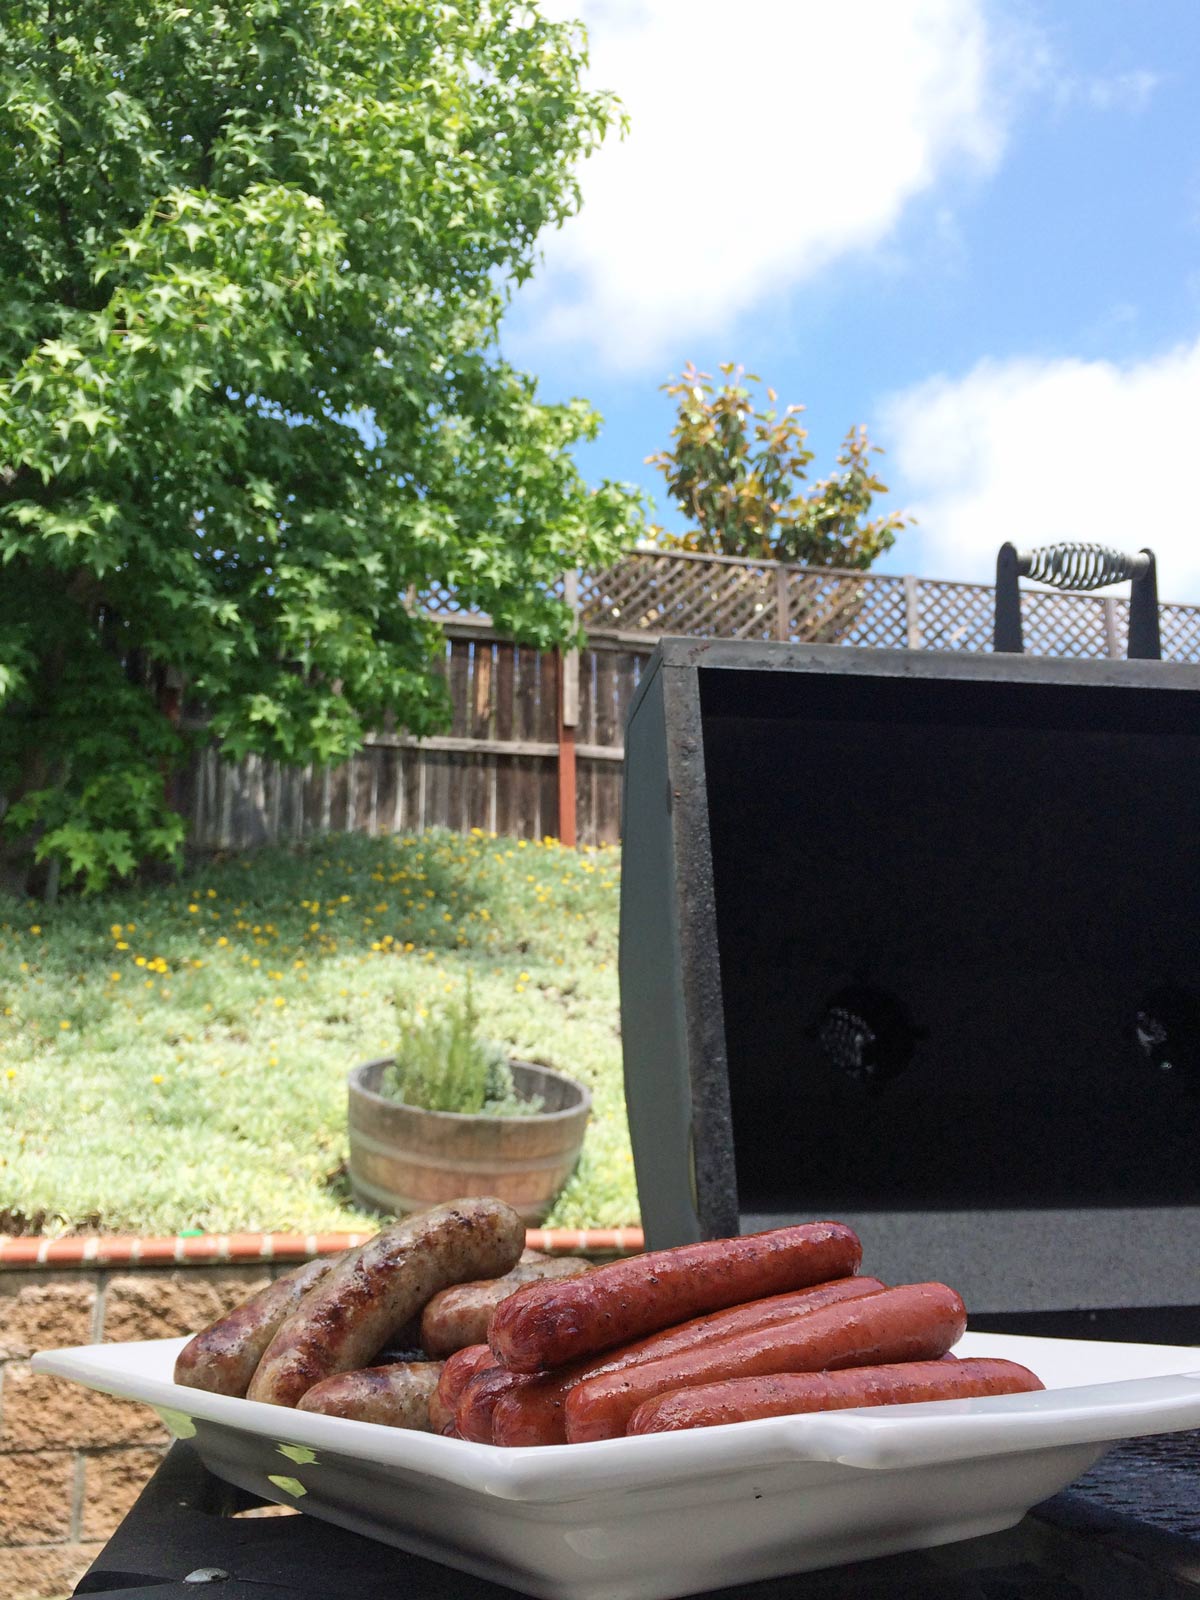 trees and blue sky in the backyard with grill and platter of sausages in the foreground.